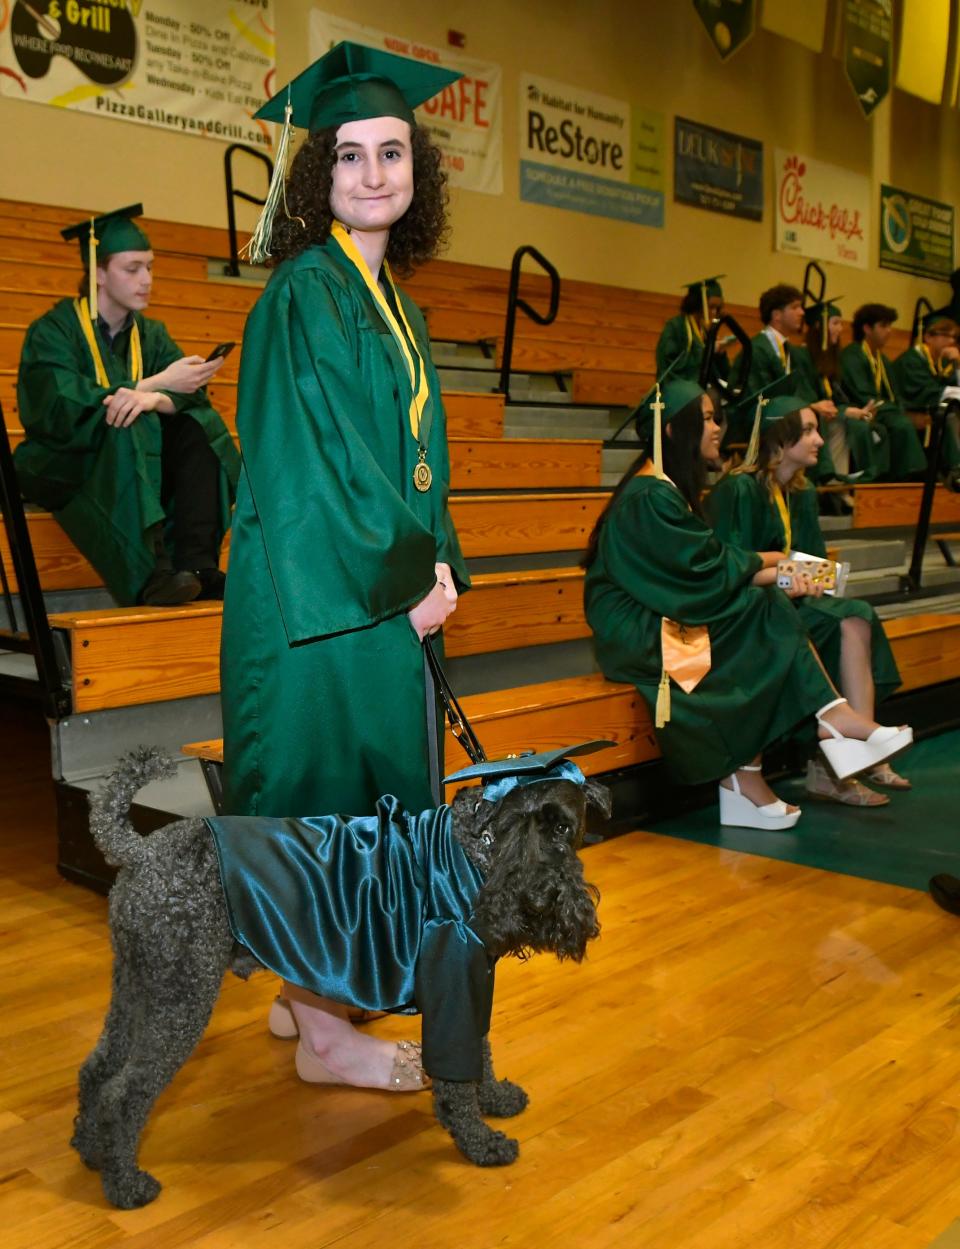 Viera High School senior Jax Russack-Cradeur, 18, graduated with her service dog Pint, a 5-year-old Kerry Blue Terrier. Jax has postural orthostatic tachycardia syndrome, also known as POTS. Pint is the first service dog to graduate from Viera High.